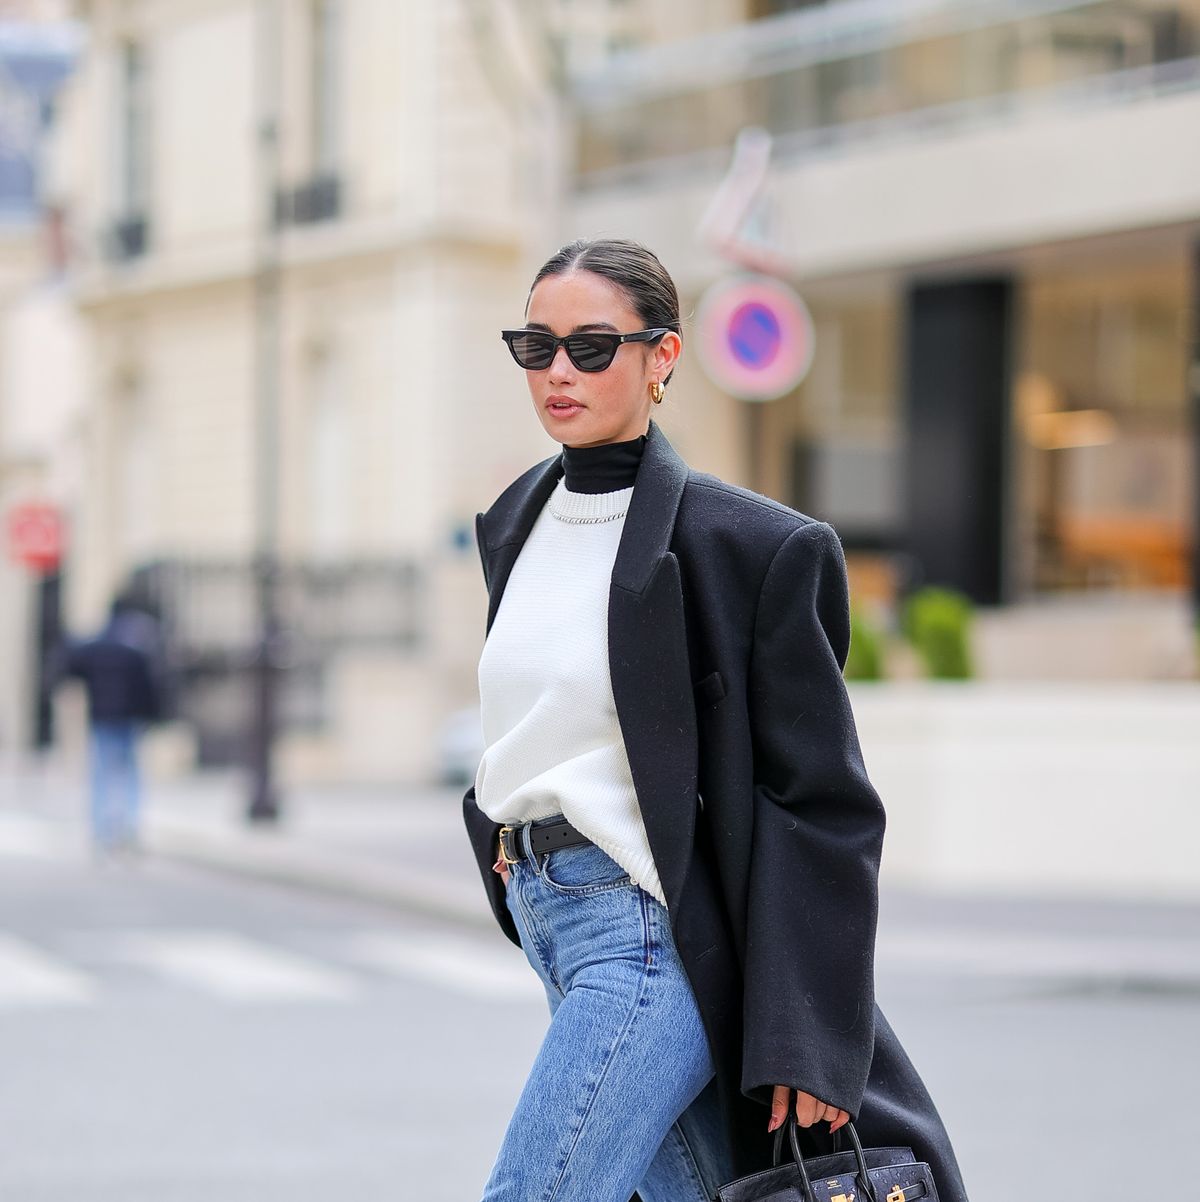 If You're Looking for the Next Big Jeans Trend, You Won't Find It